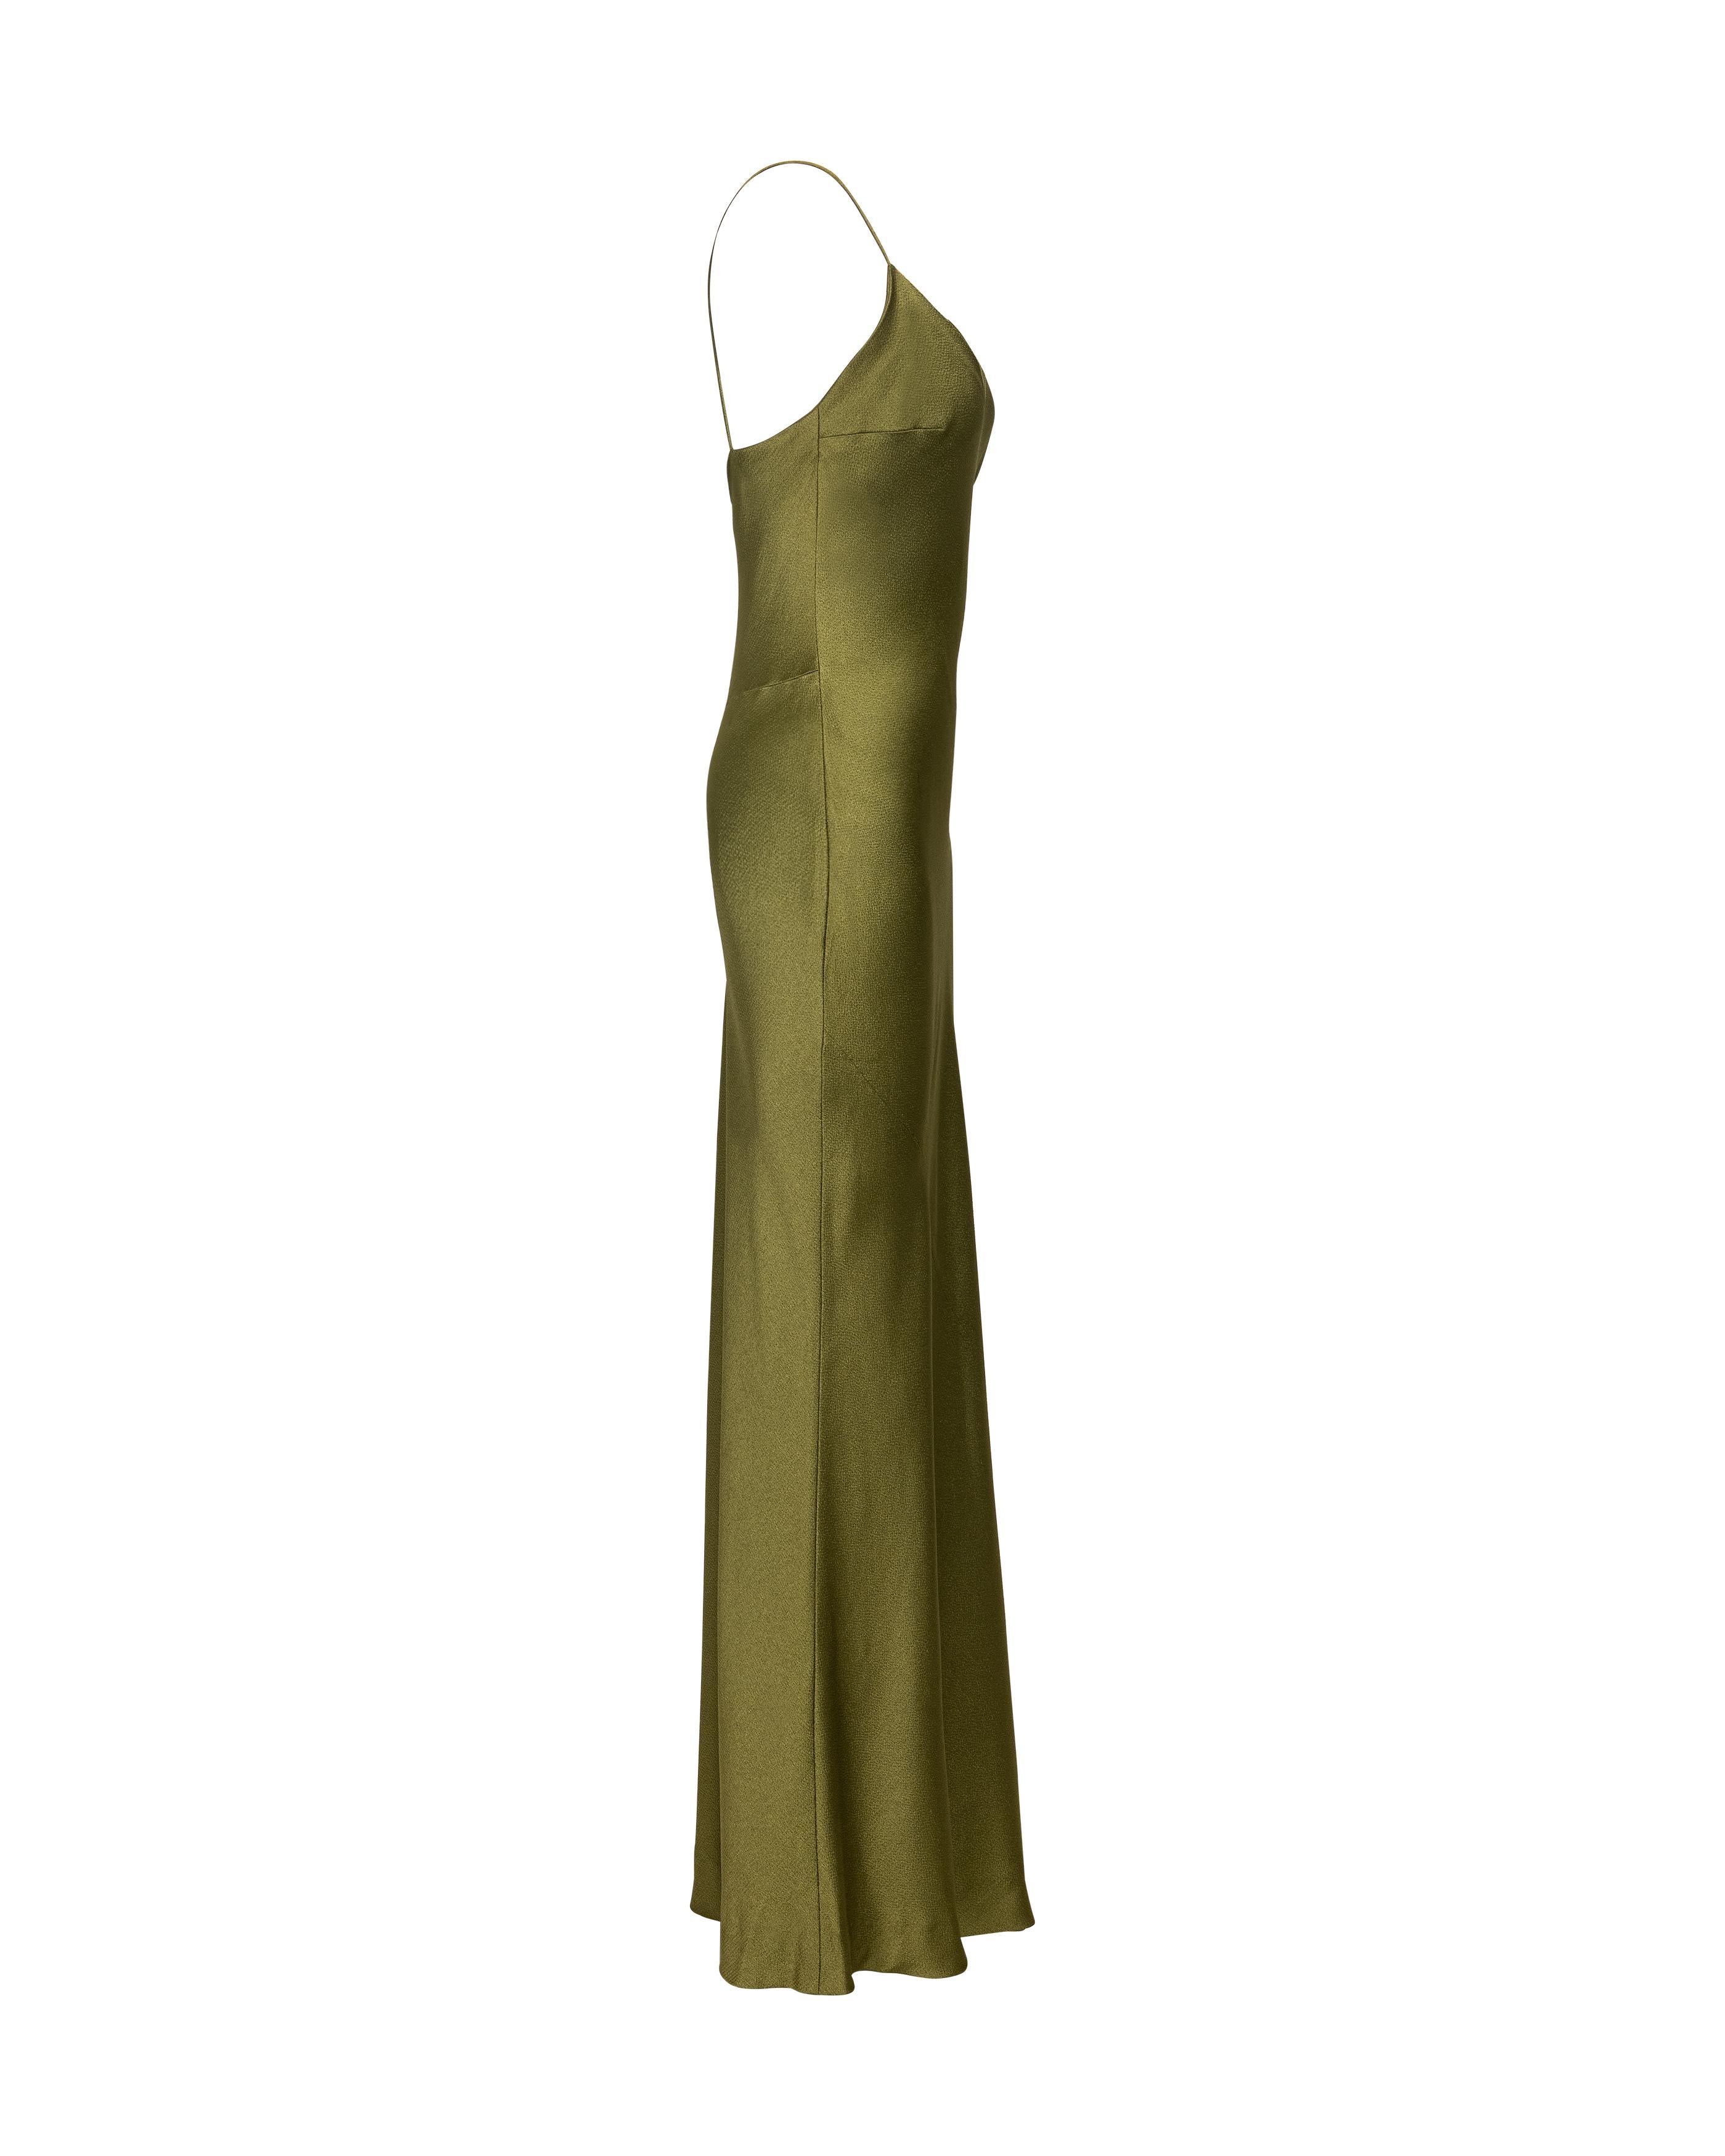 S/S 1999 Christian Dior by John Galliano Olive Green Bias Cut Slip Gown 1